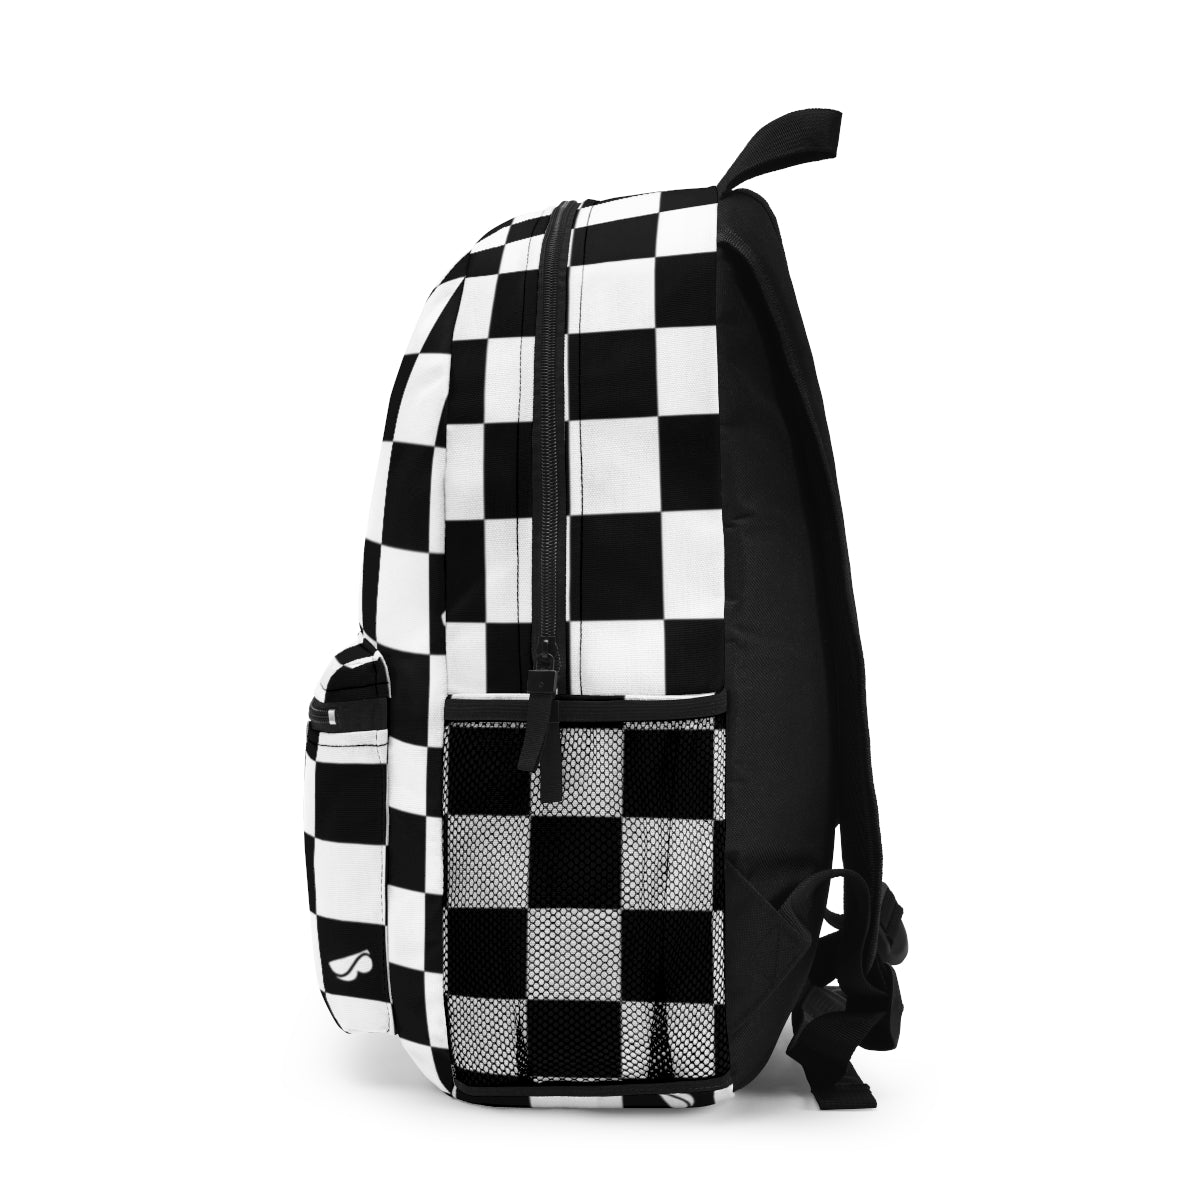 Backpack - Checkered